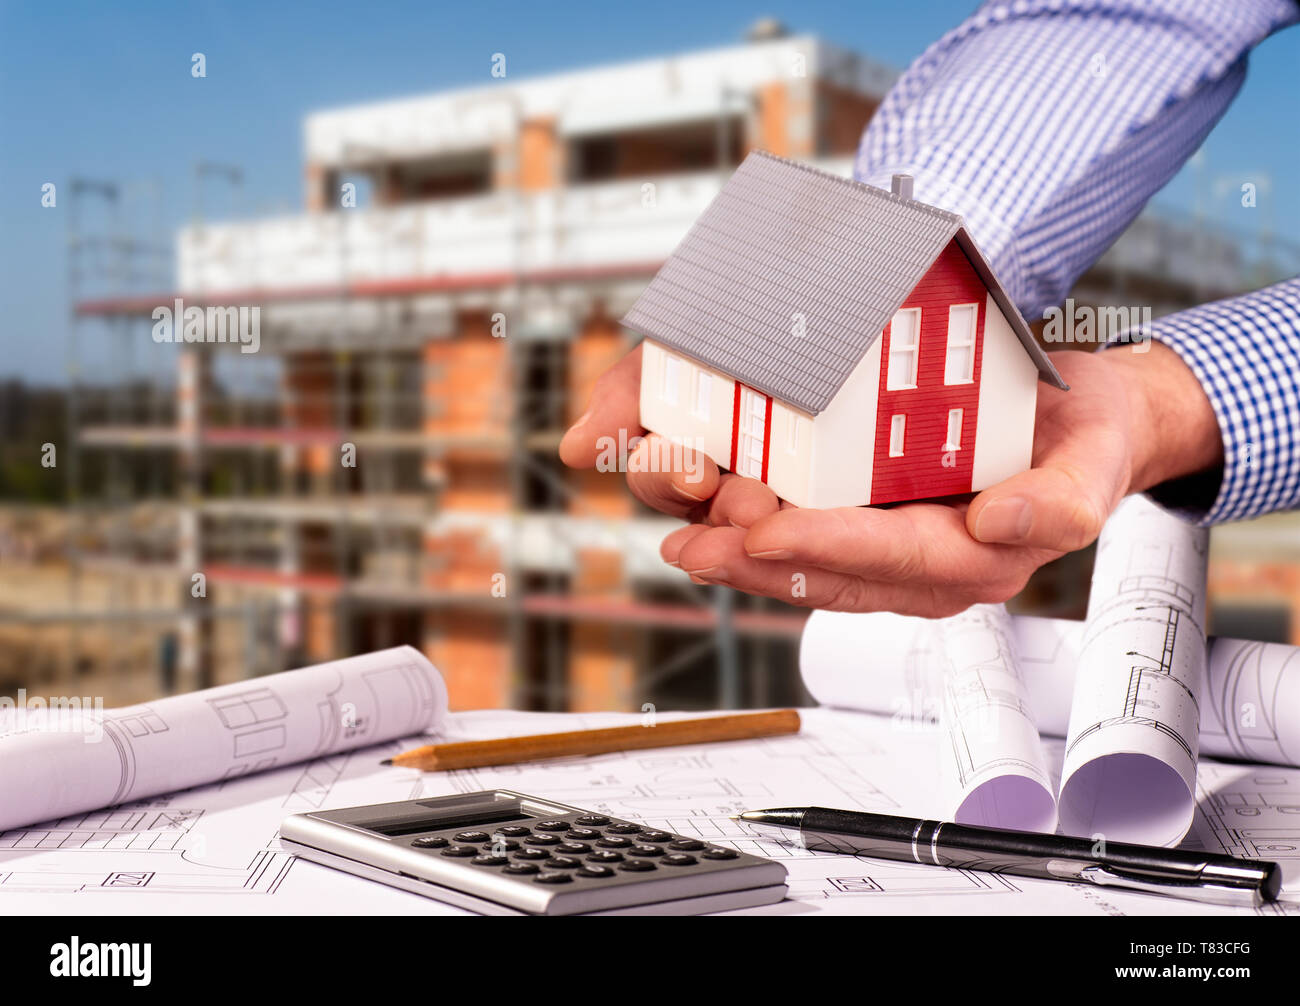 Construction plans with calculator, architectural model and a shell in the background Stock Photo